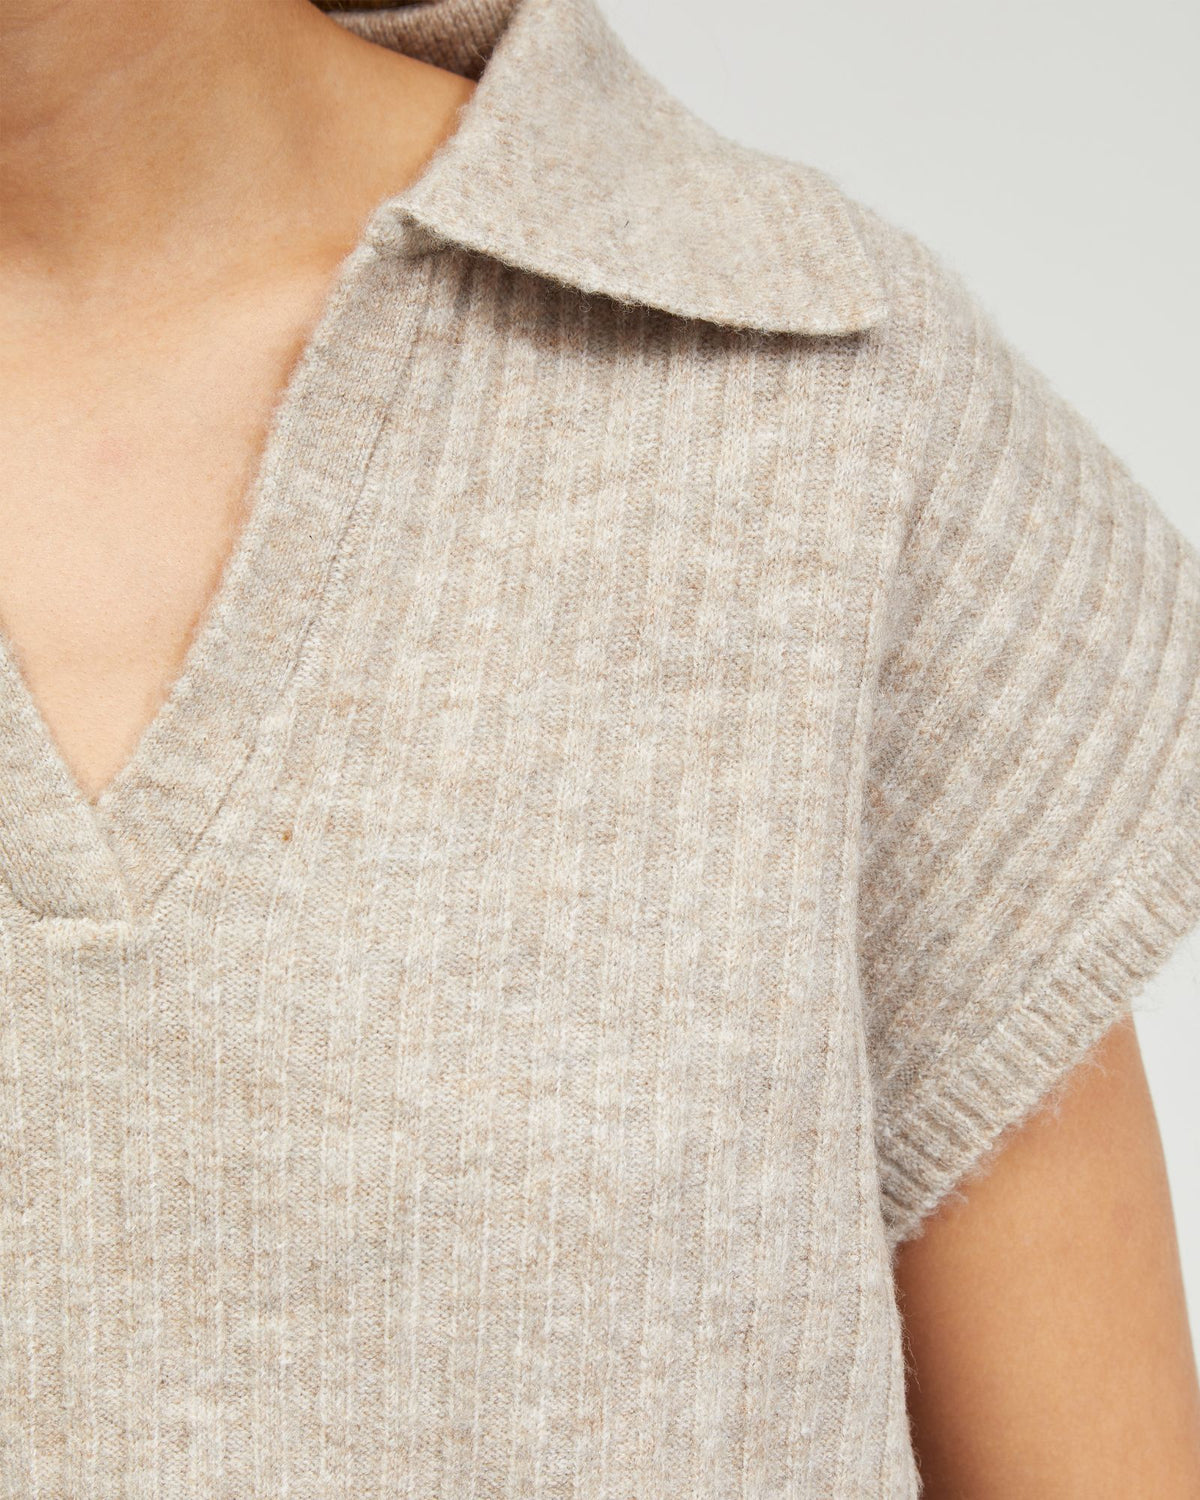 BECCA POLO NECK VEST - AVAILABLE ~ 1-2 weeks WOMENS KNITWEAR